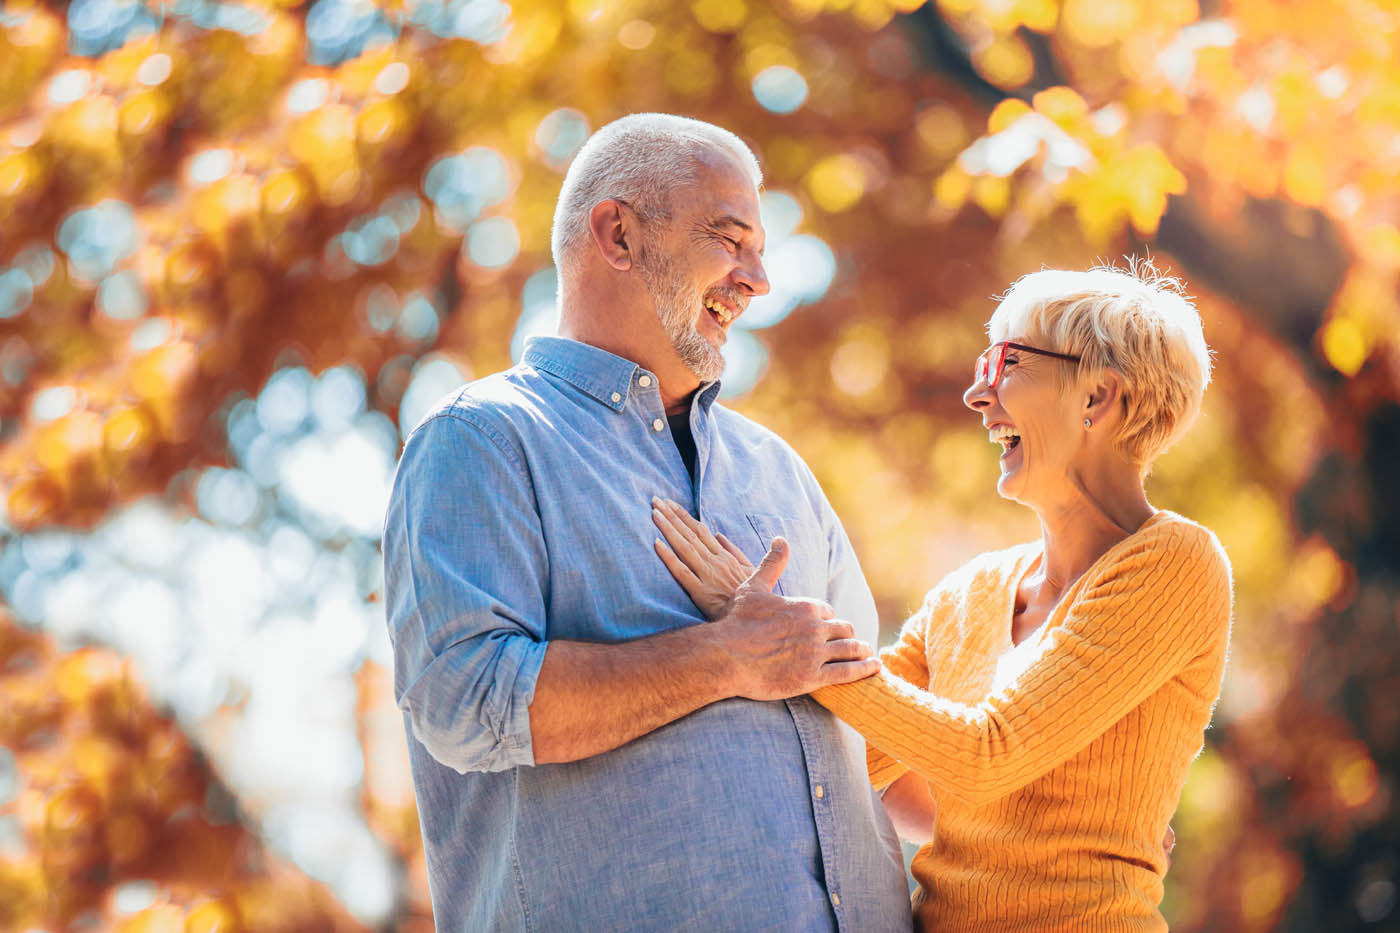 Two older people outside in the fall weather - loving each other and the affects of bbl photofacial in Arvada.